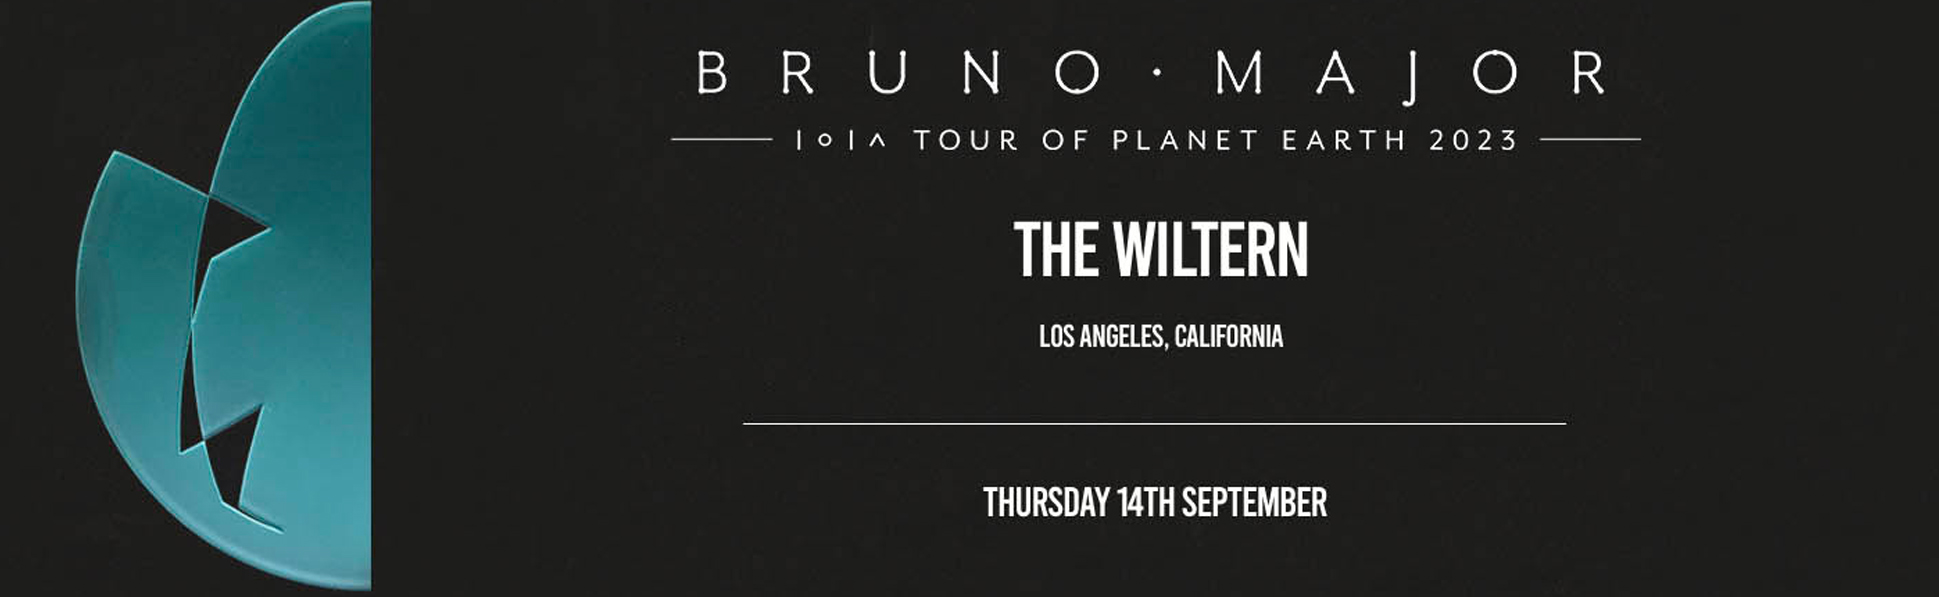 Bruno Major at The Wiltern